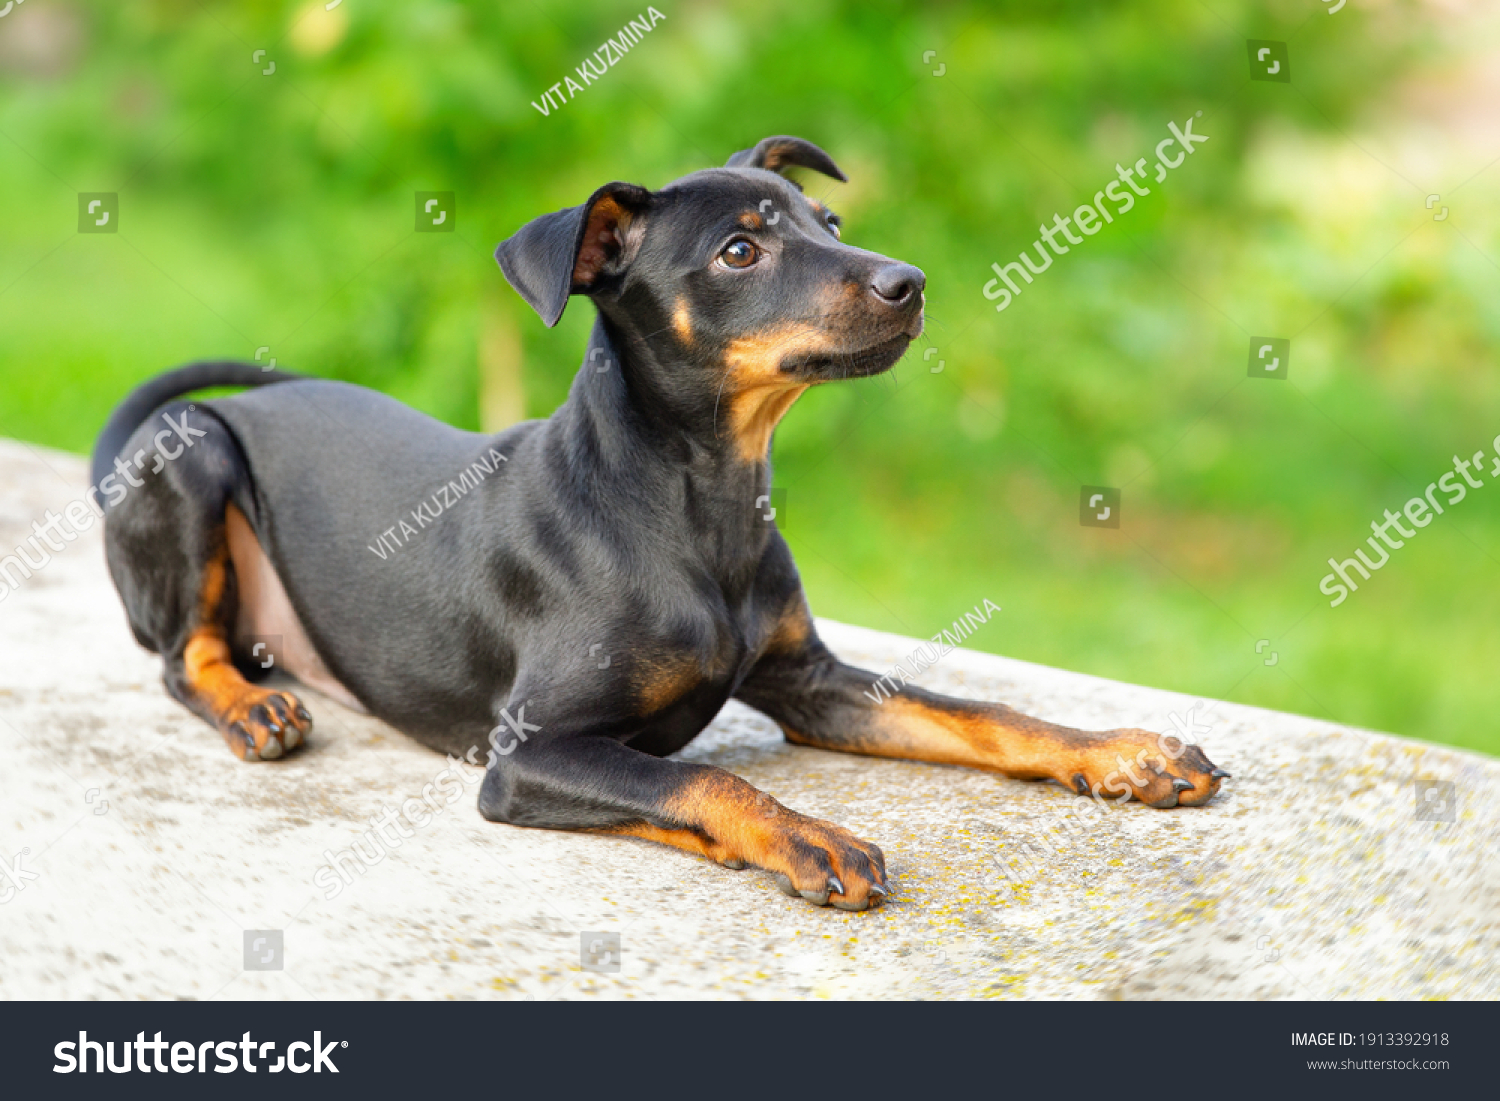 Black and tan miniature pinscher portrait on summer time. German miniature pinscher lies outdoors on a concrete siter with green background. Smart and cute pincher with funny ears and round eyes #1913392918